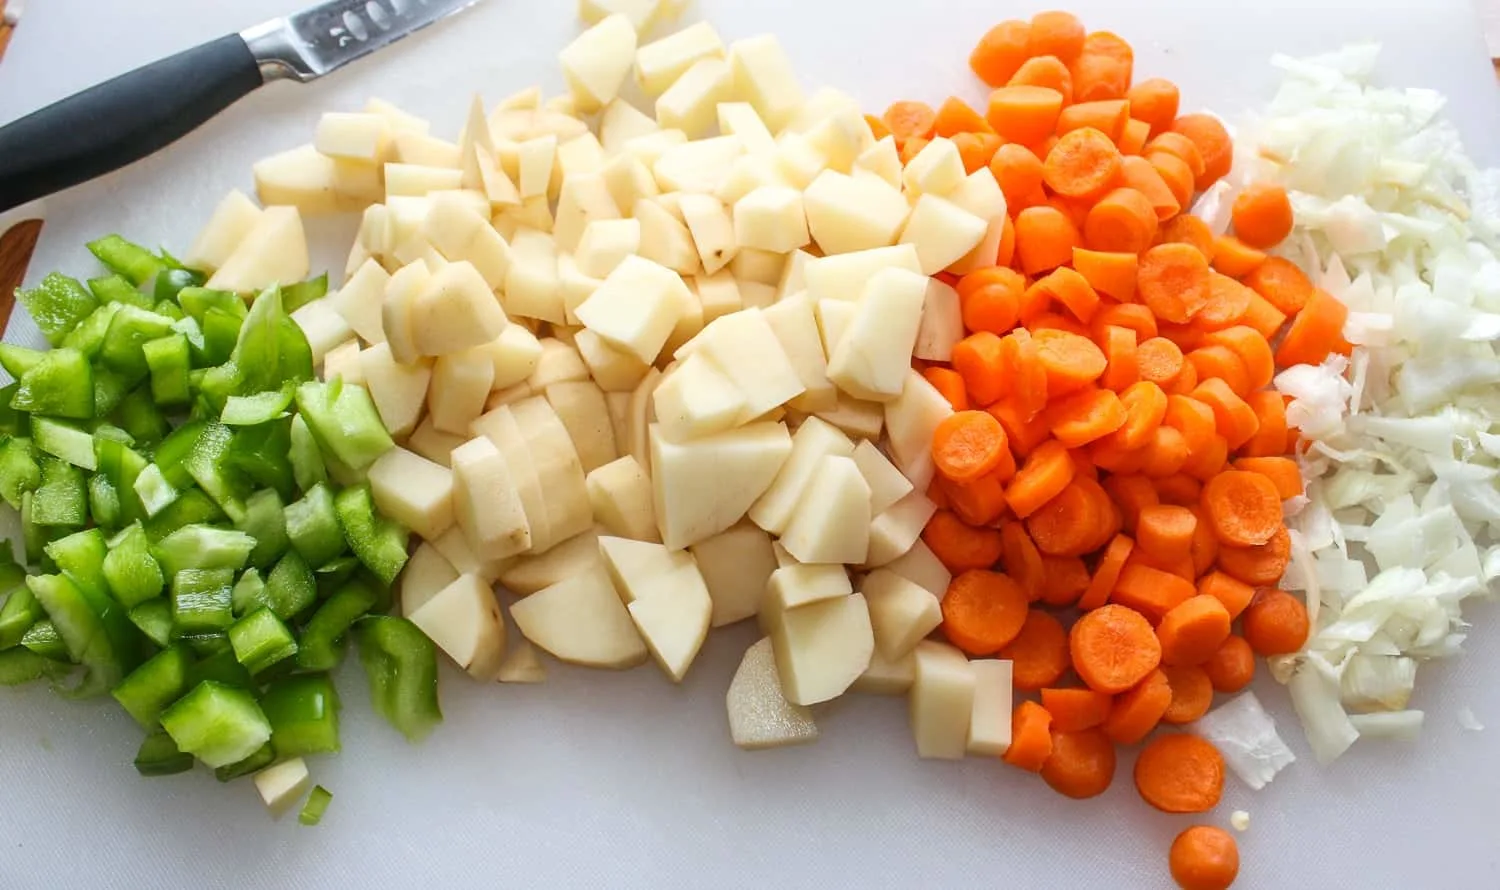 The cut vegetables